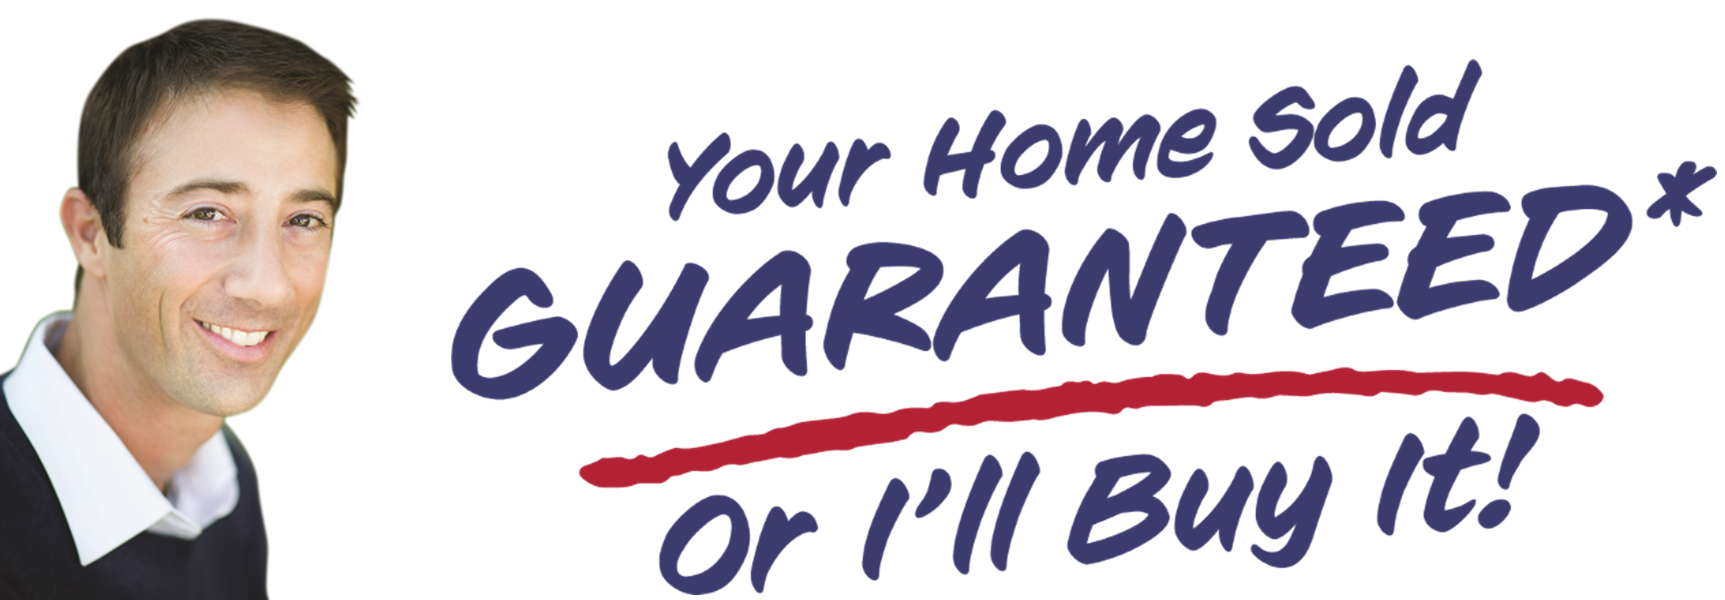 Your Home Sold Guaranteed Or I'll Buy It – Samuel Weiner logo